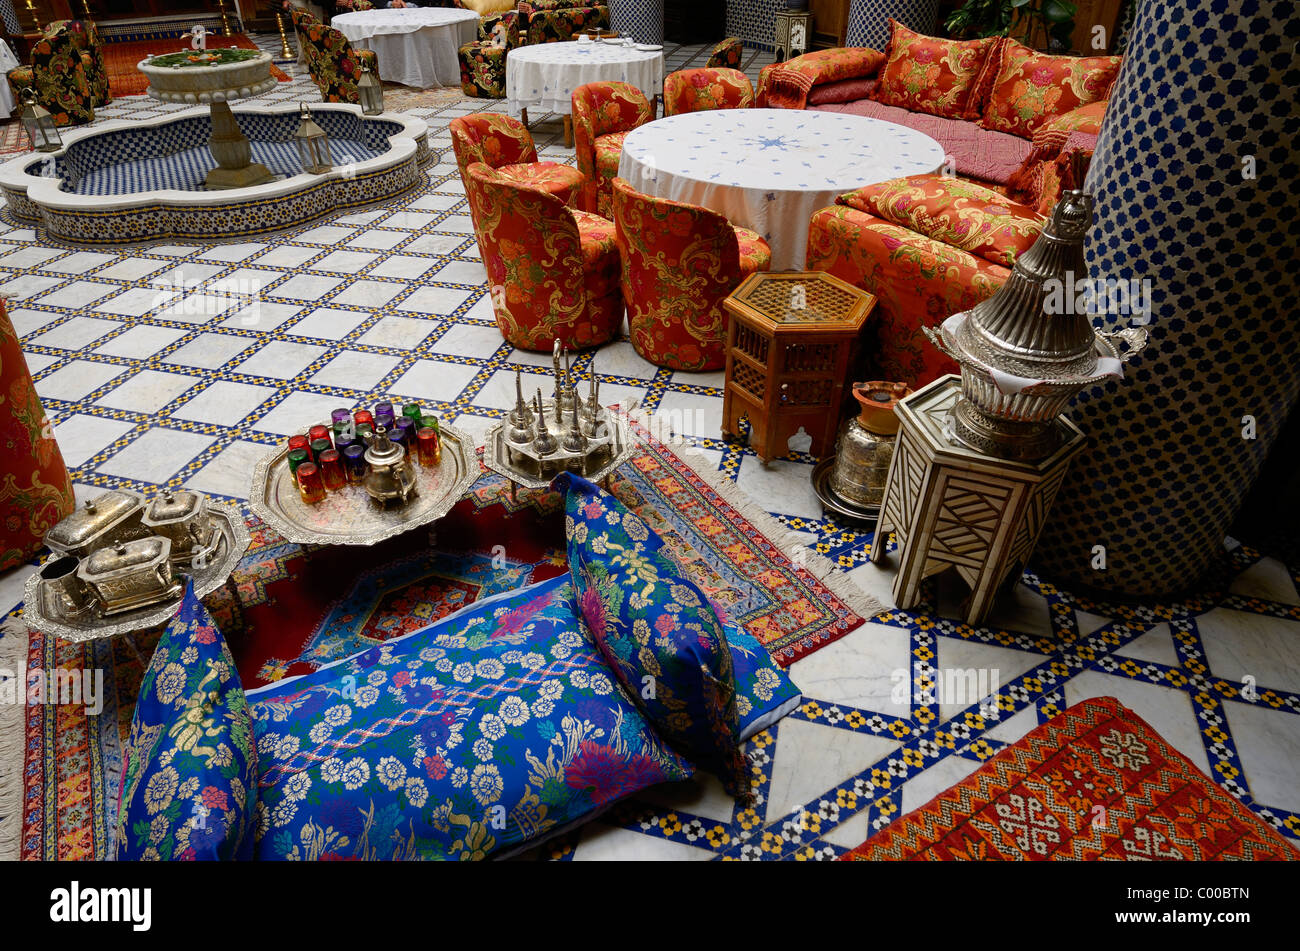 Tea set and dining area in Moorish style inside Riad El Yacout in Fes el Bali Morocco Stock Photo